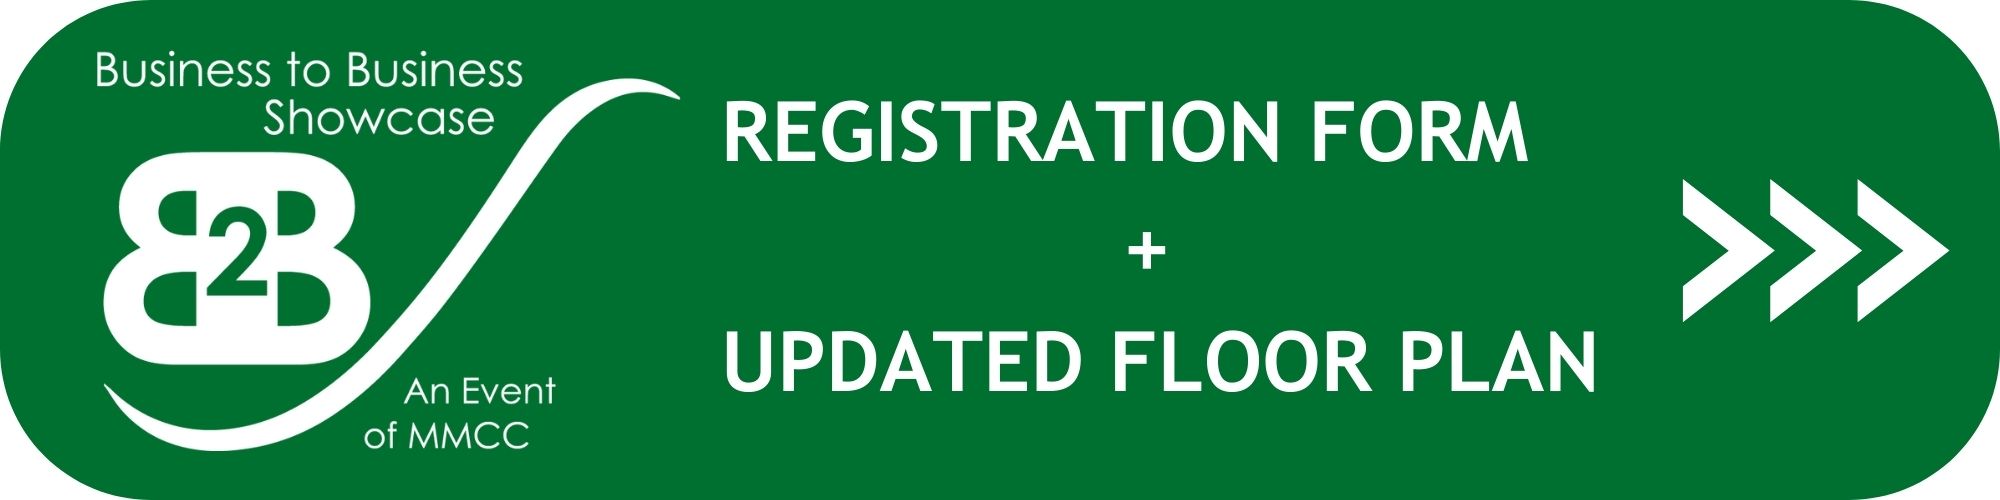 Registration Form and Updated Floor Plan